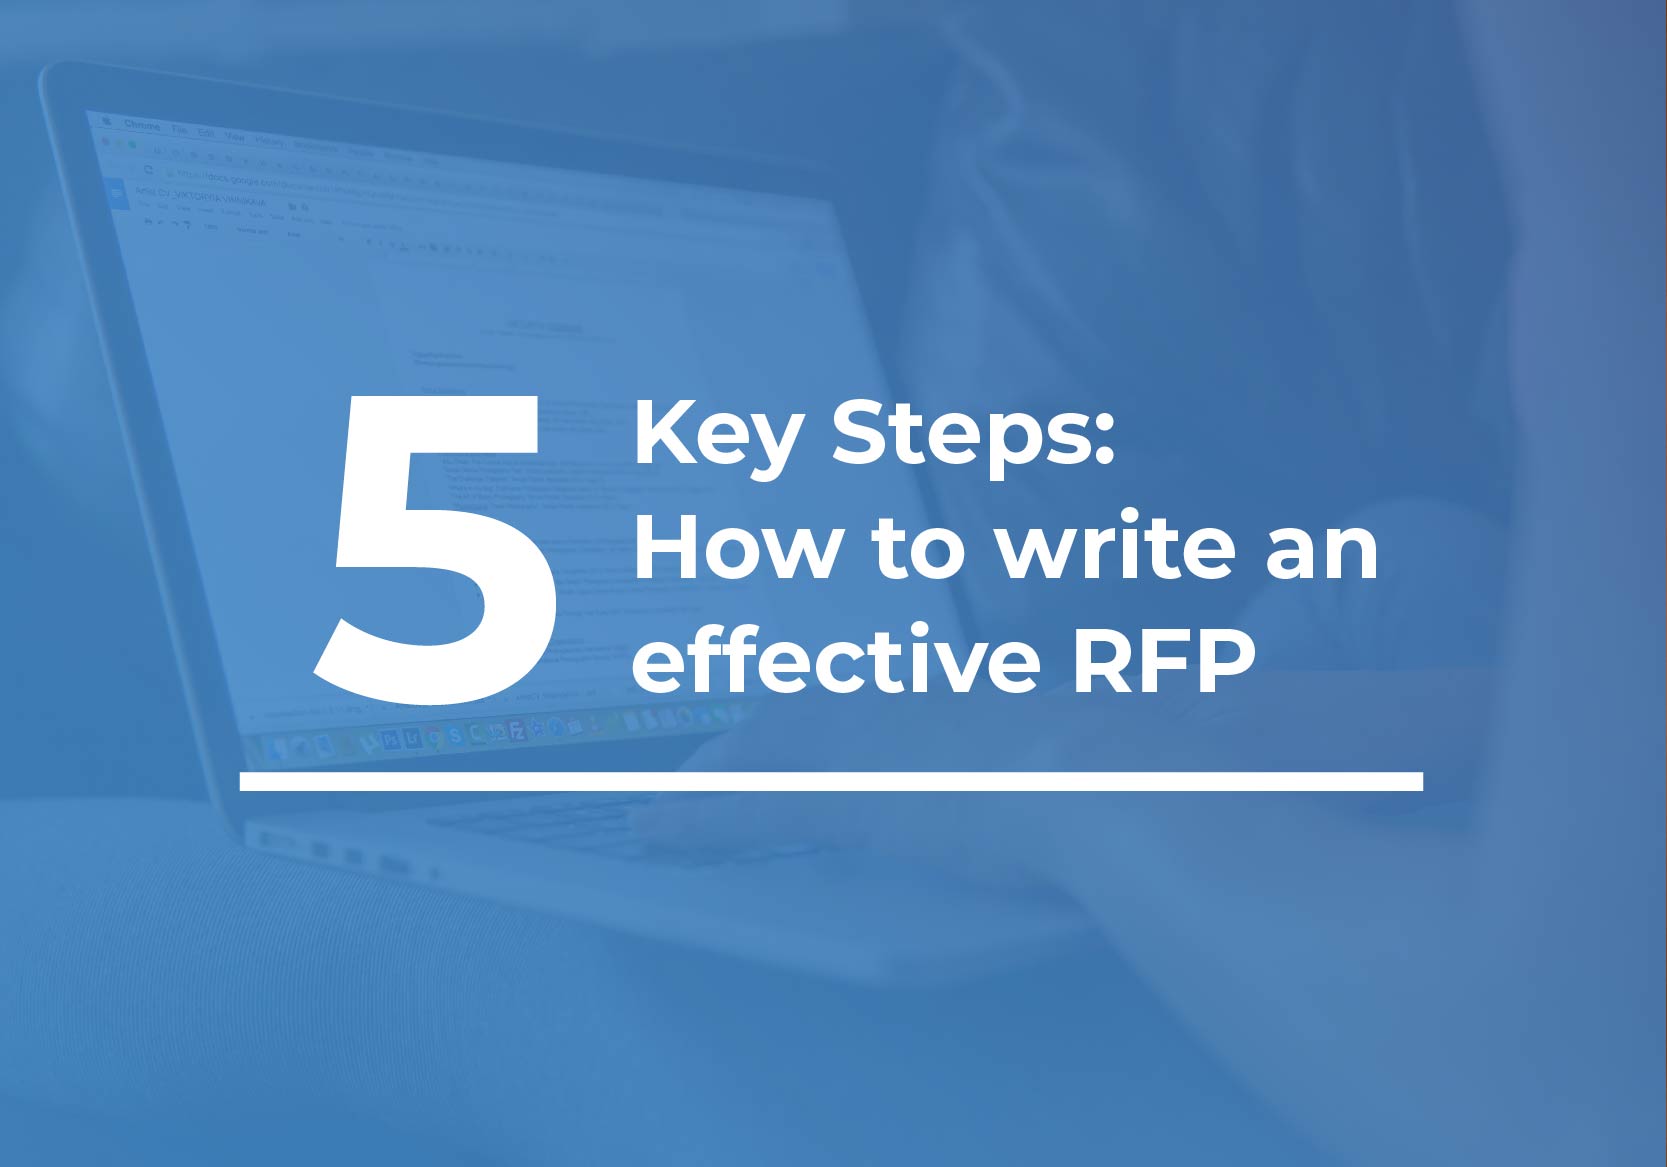 How To Write an RFP: Tips, templates and tools - RFP16